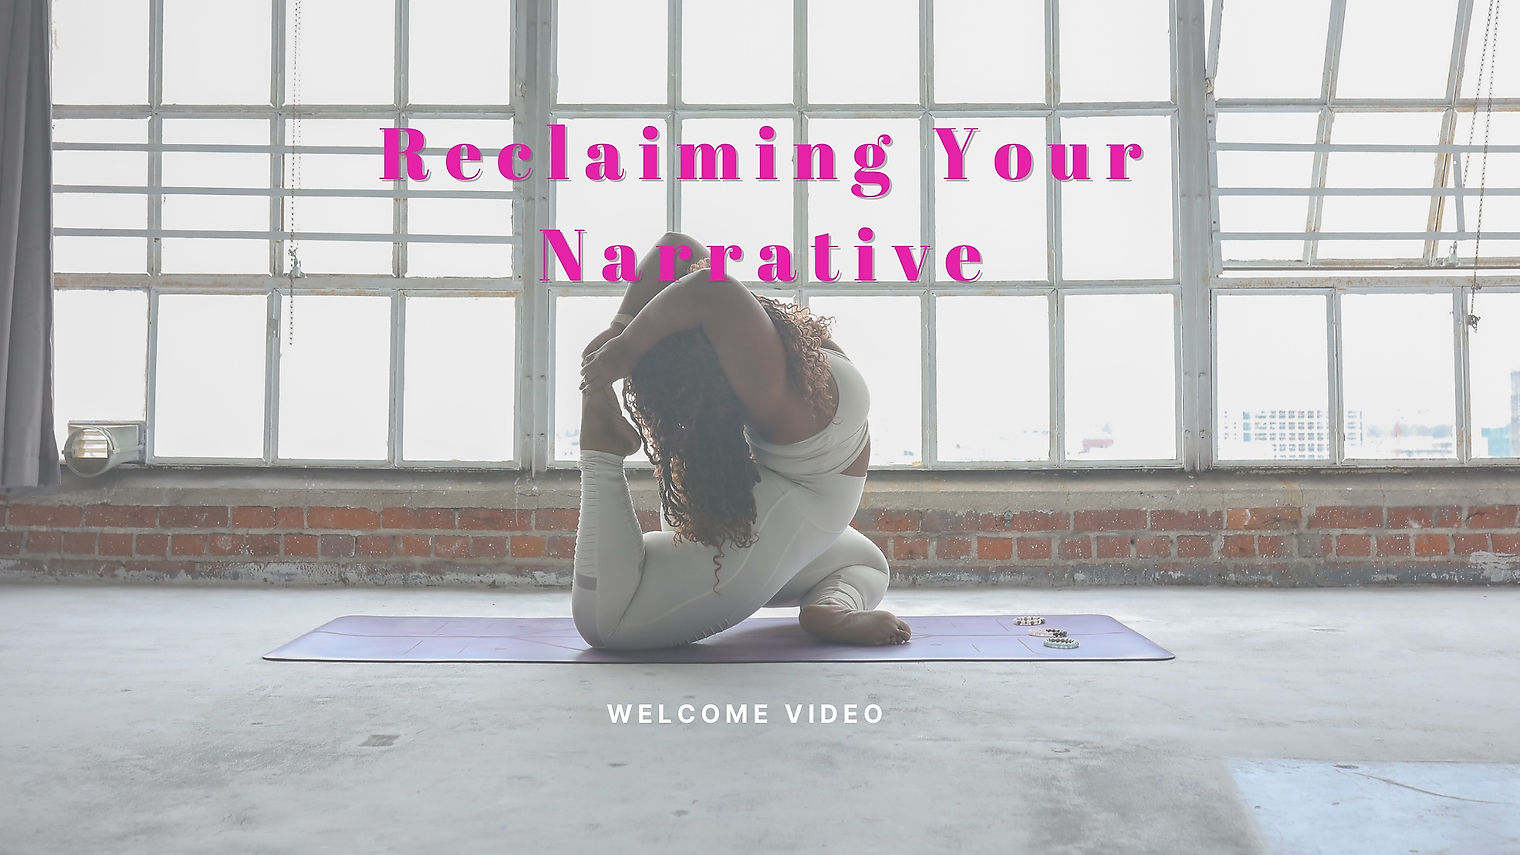 Reclaiming Your Narrative